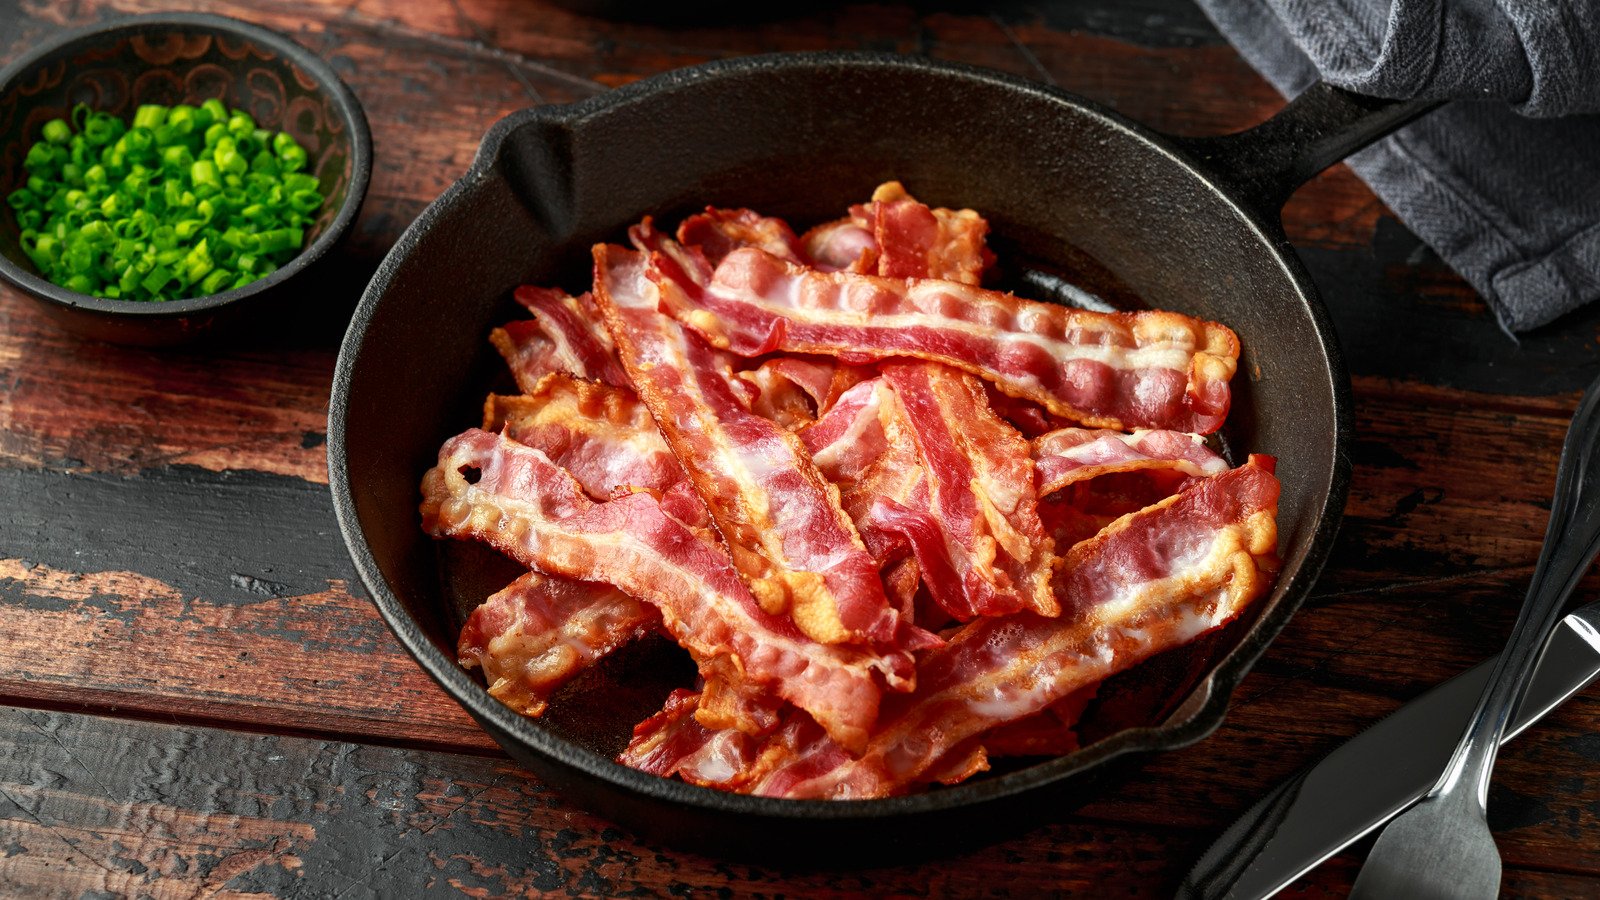 What You Should Consider Before Cooking Bacon On The Stovetop.